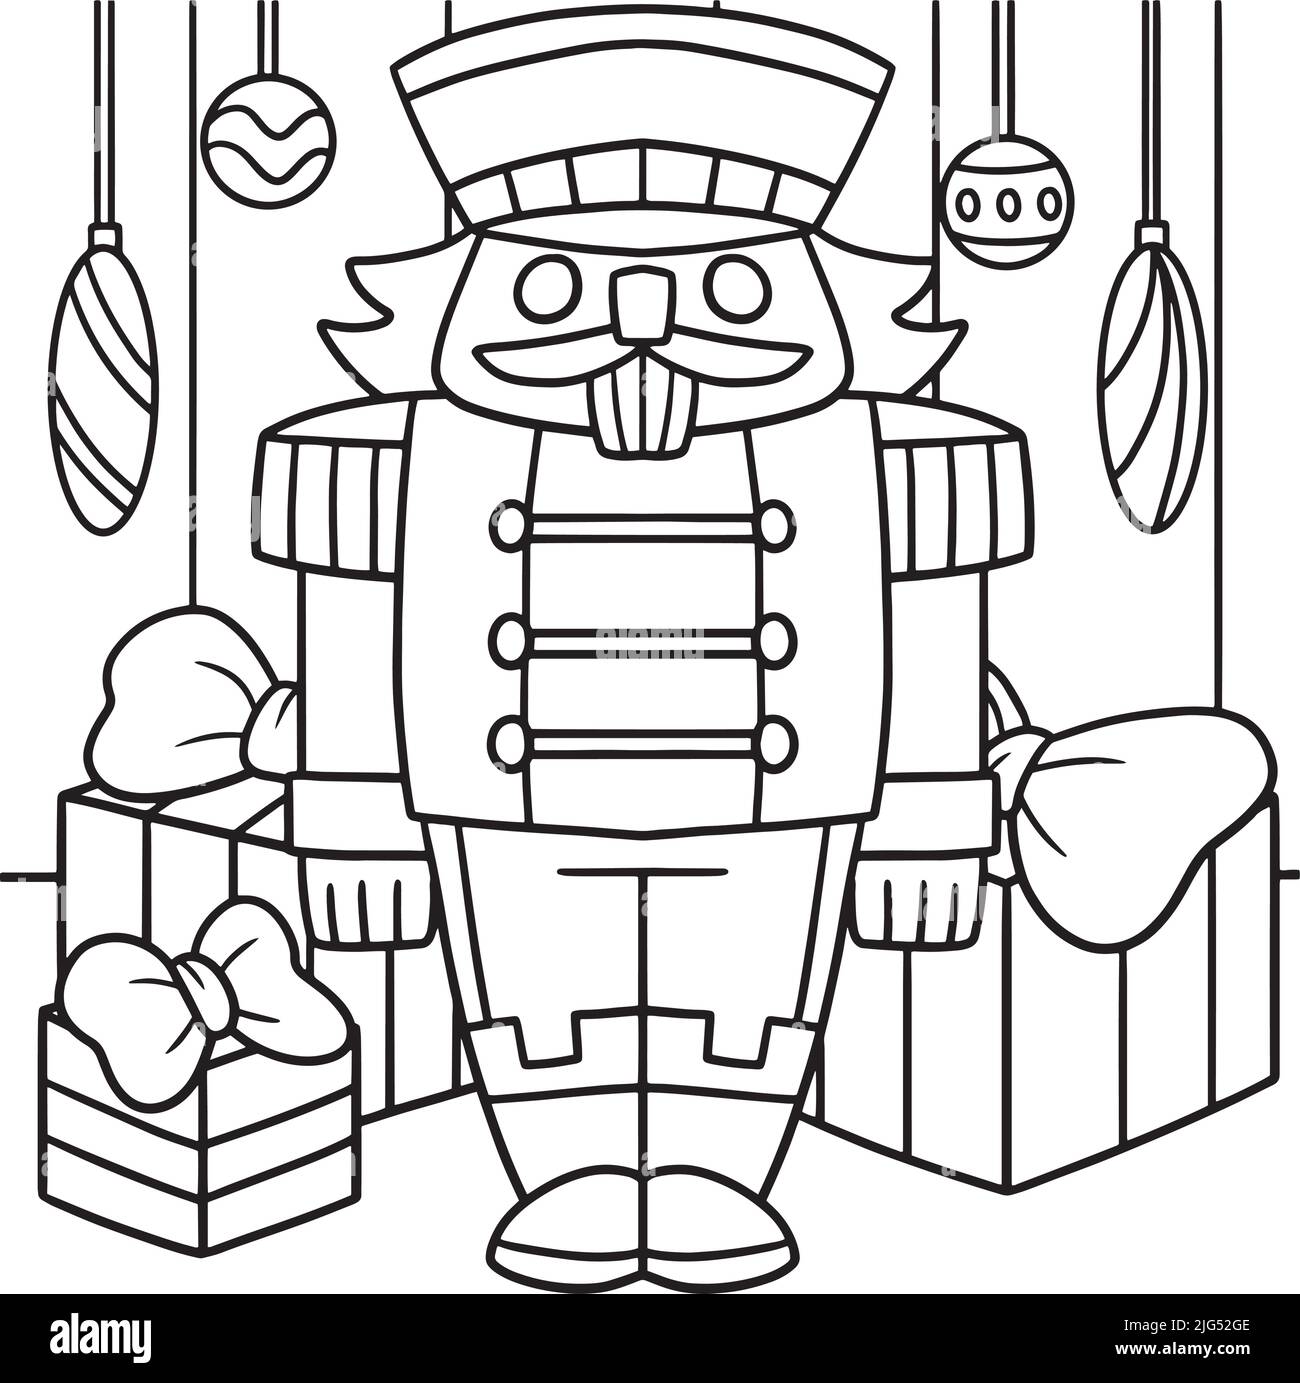 Nutcracker Coloring Page for Kids Stock Vector